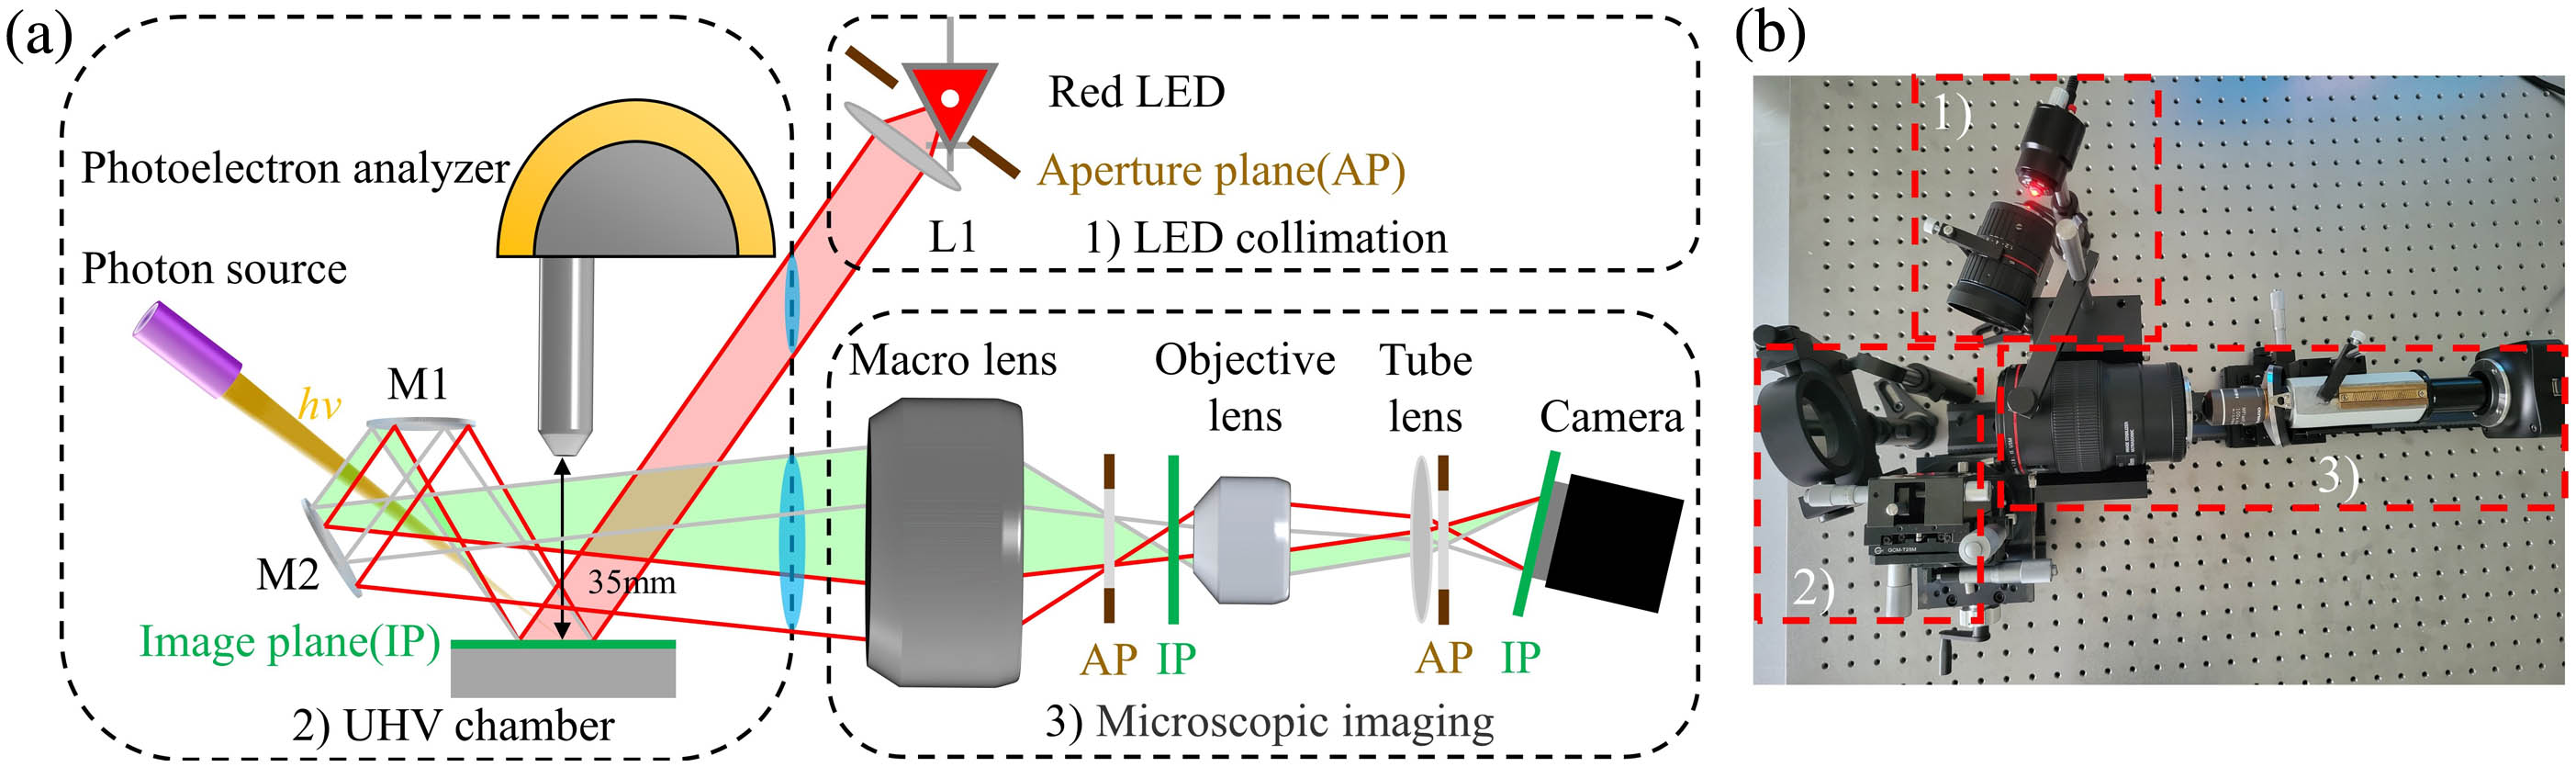 Principle and scheme of the side-assisting microscope. (a) Principal optical setup including three parts: (1) LED collimation stage; (2) ultrahigh vacuum chamber; (3) microscopic imaging. (b) Photo of the experimental setup in a clean laboratory air environment.